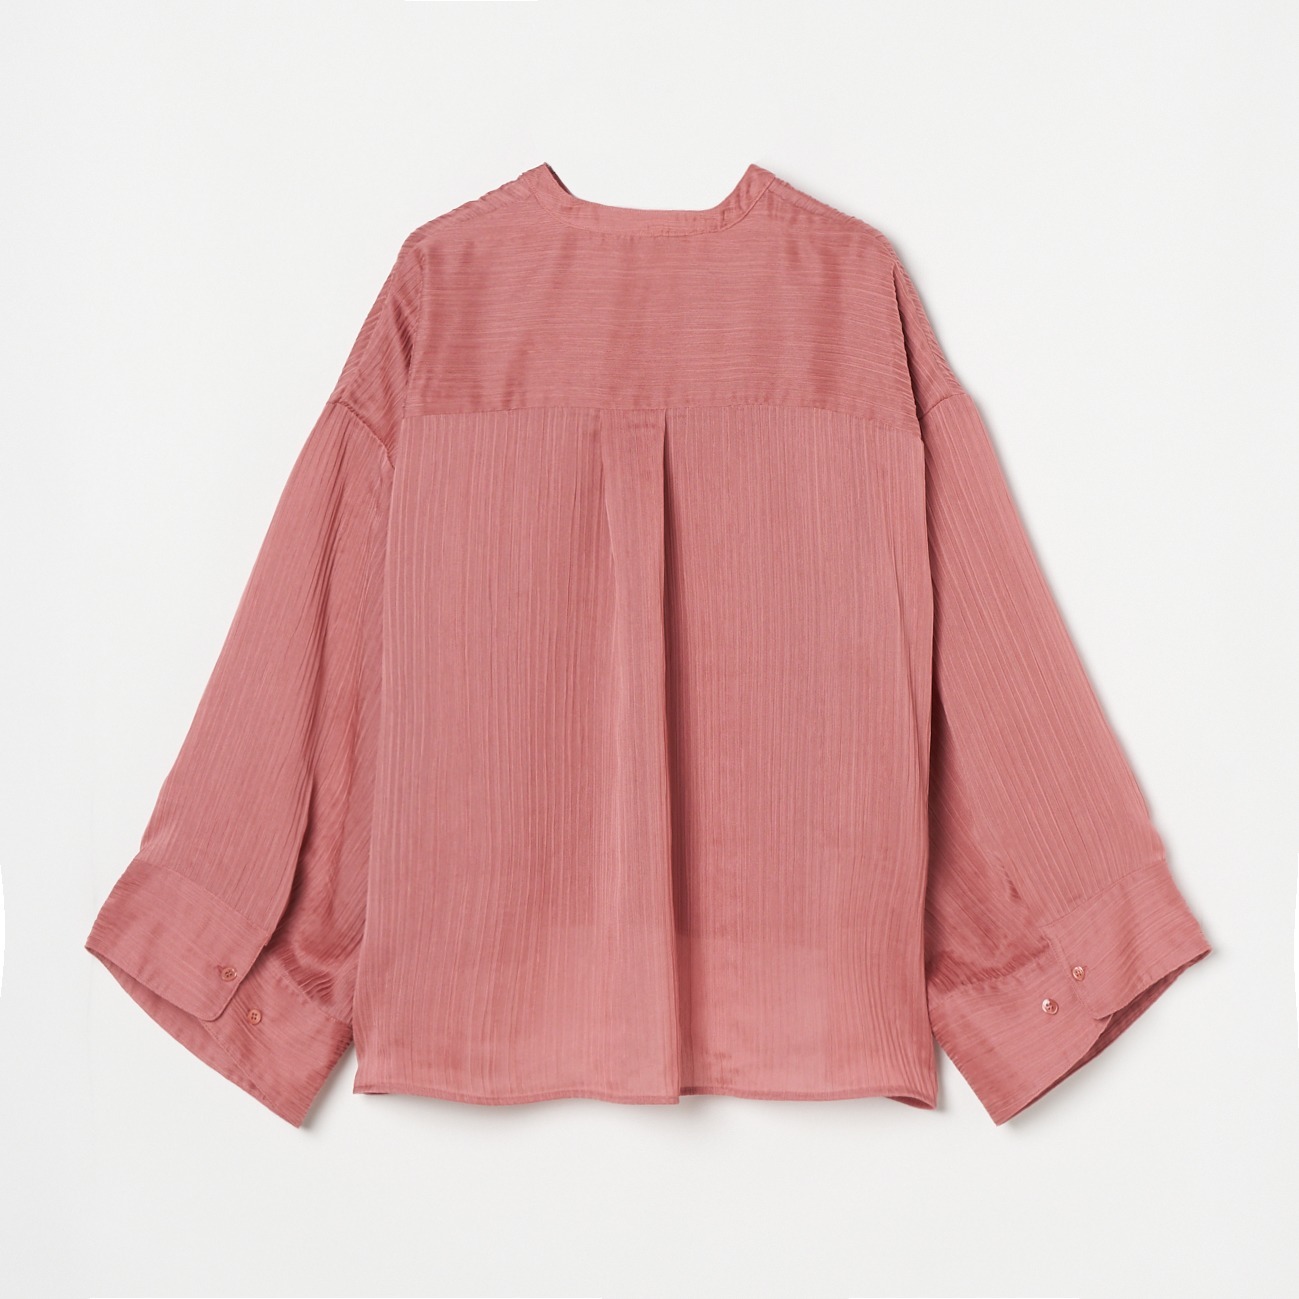 DOUBLE WILLOW BIG SLEEVES SHIRT 詳細画像 ピンク 1